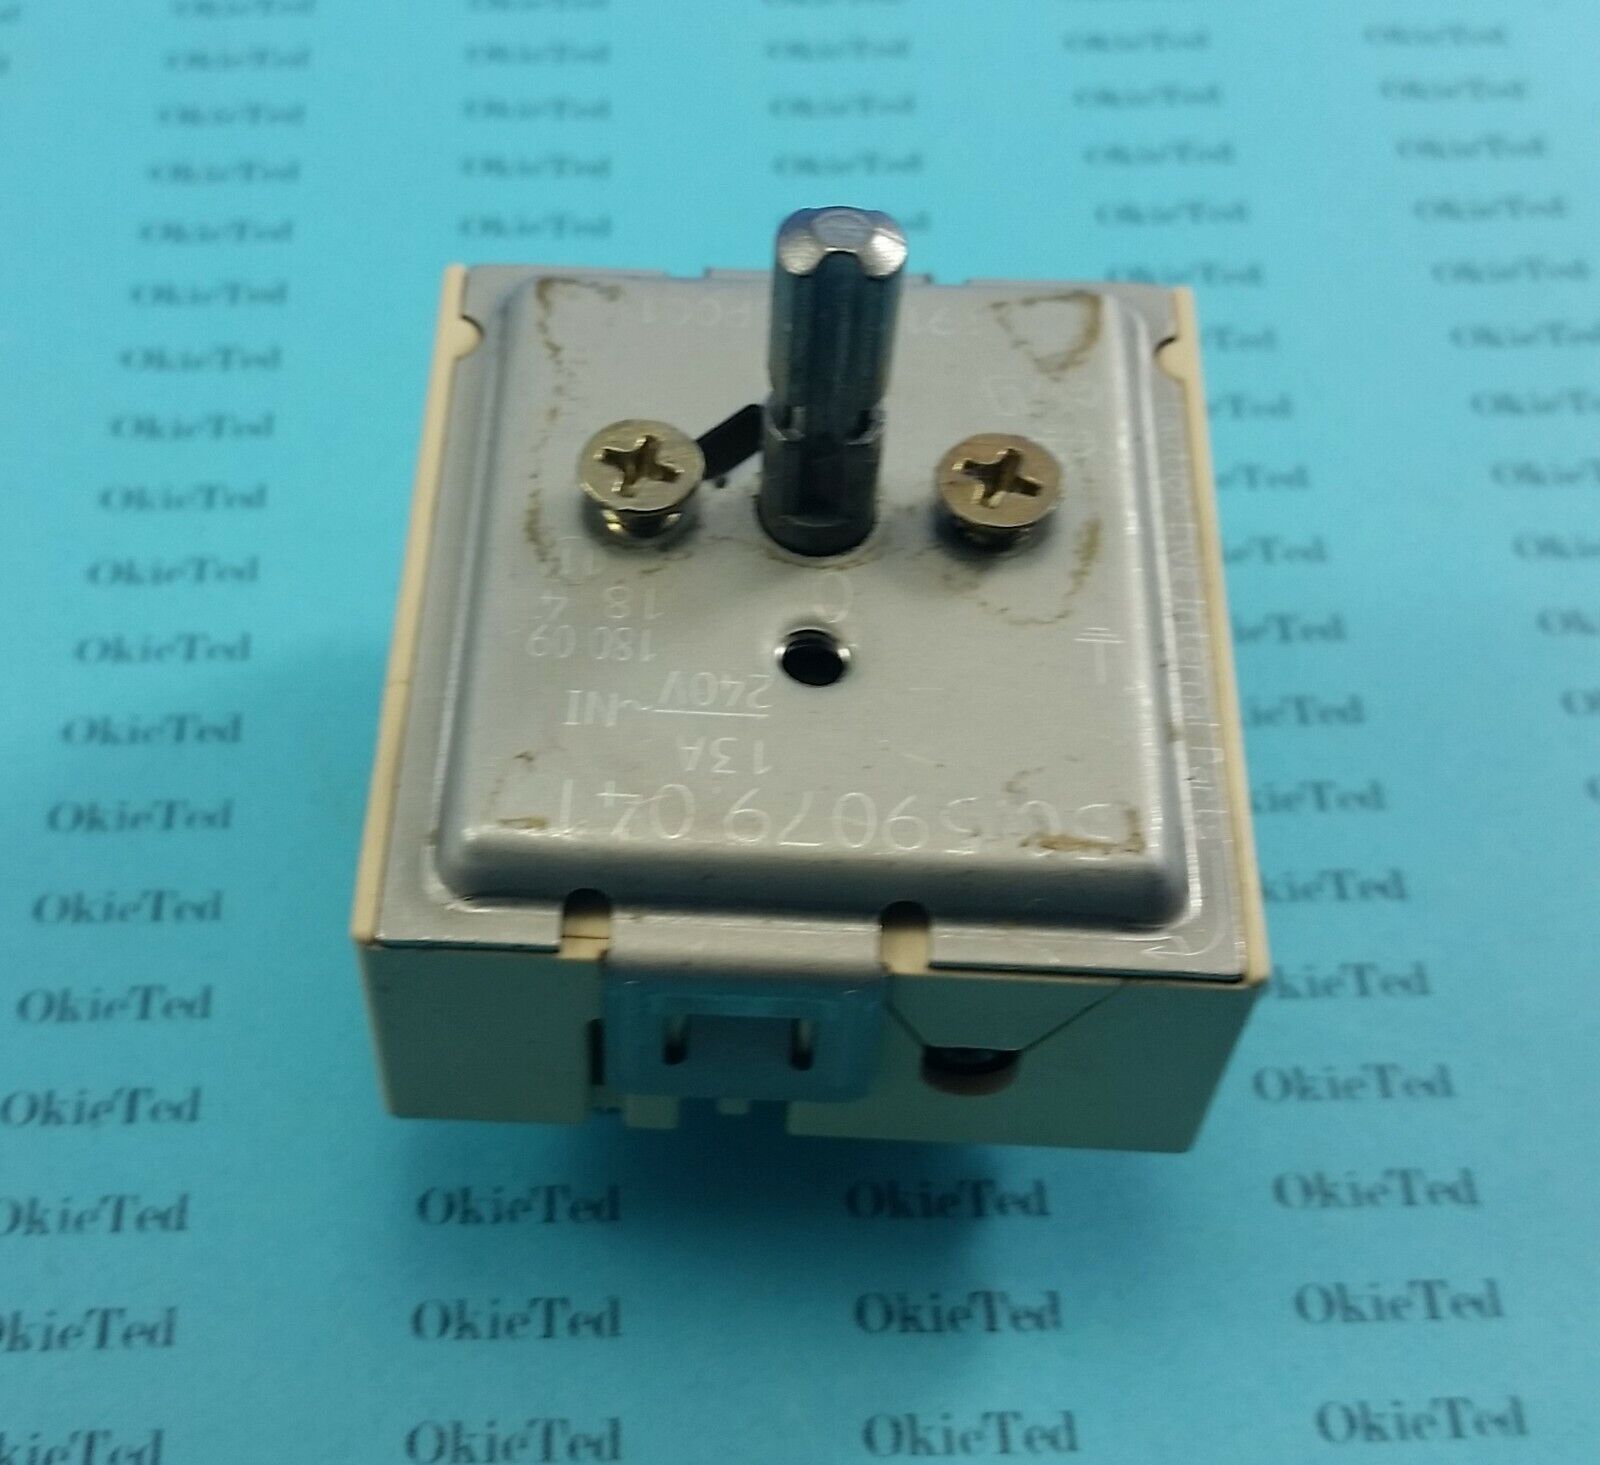 GE surface element infinite switch 191D4773P006